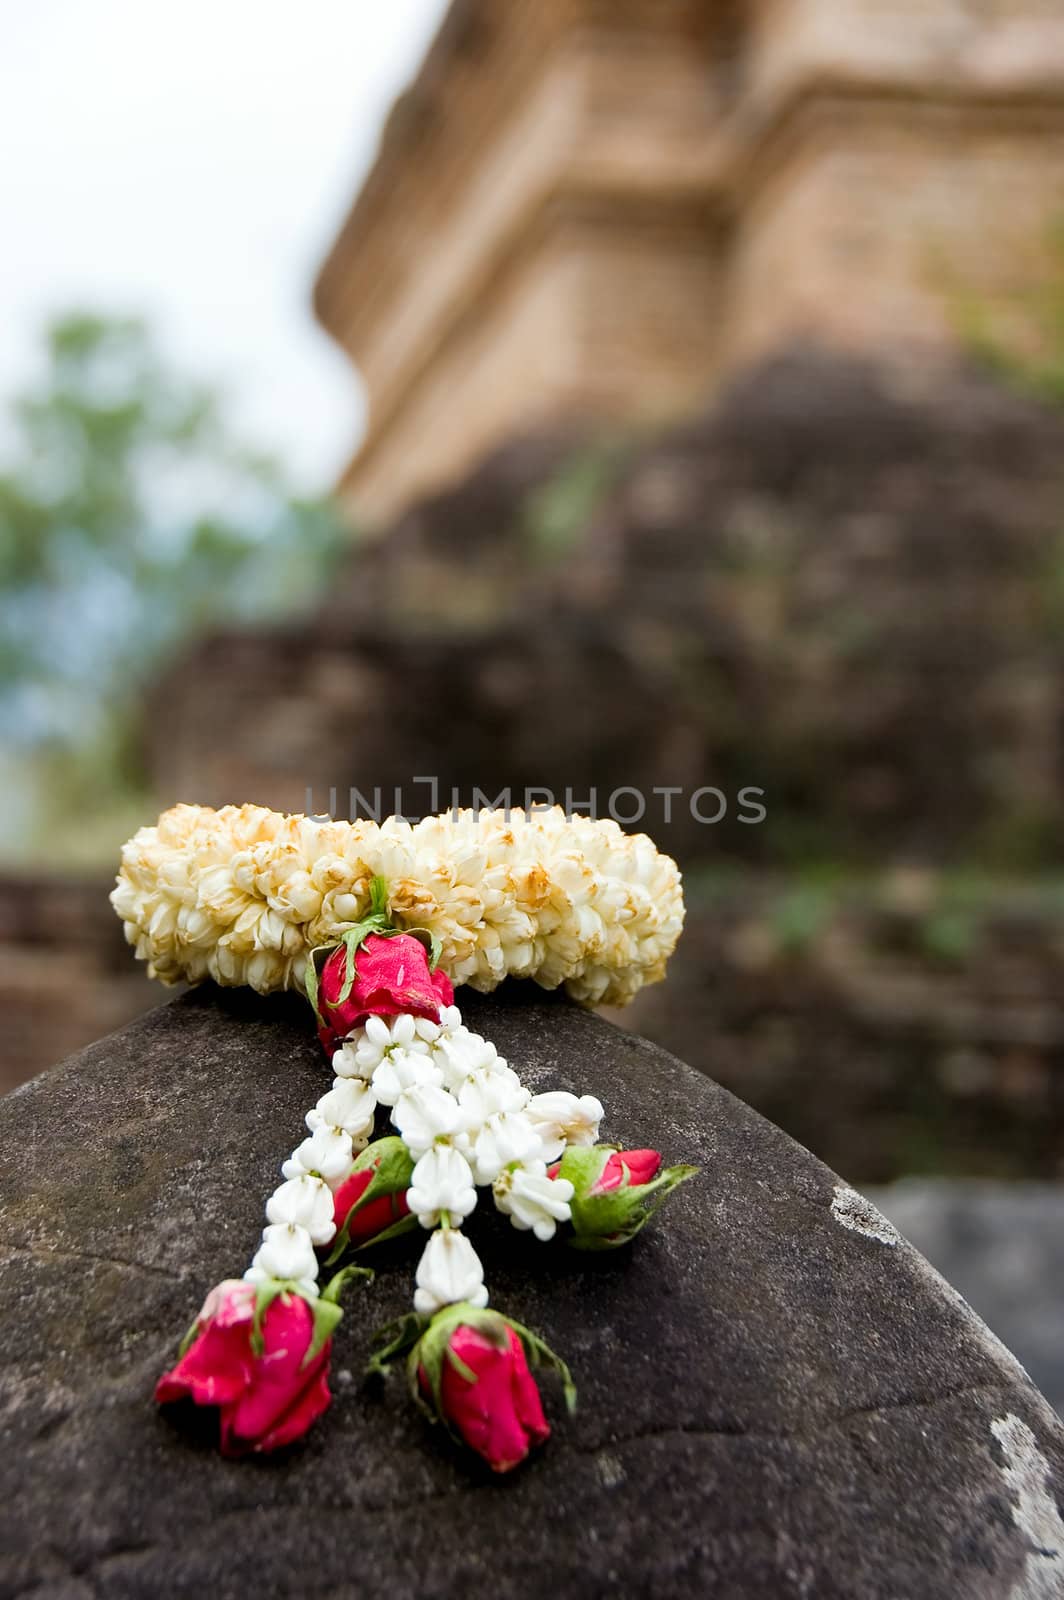 buddhist flower offerings by jsompinm